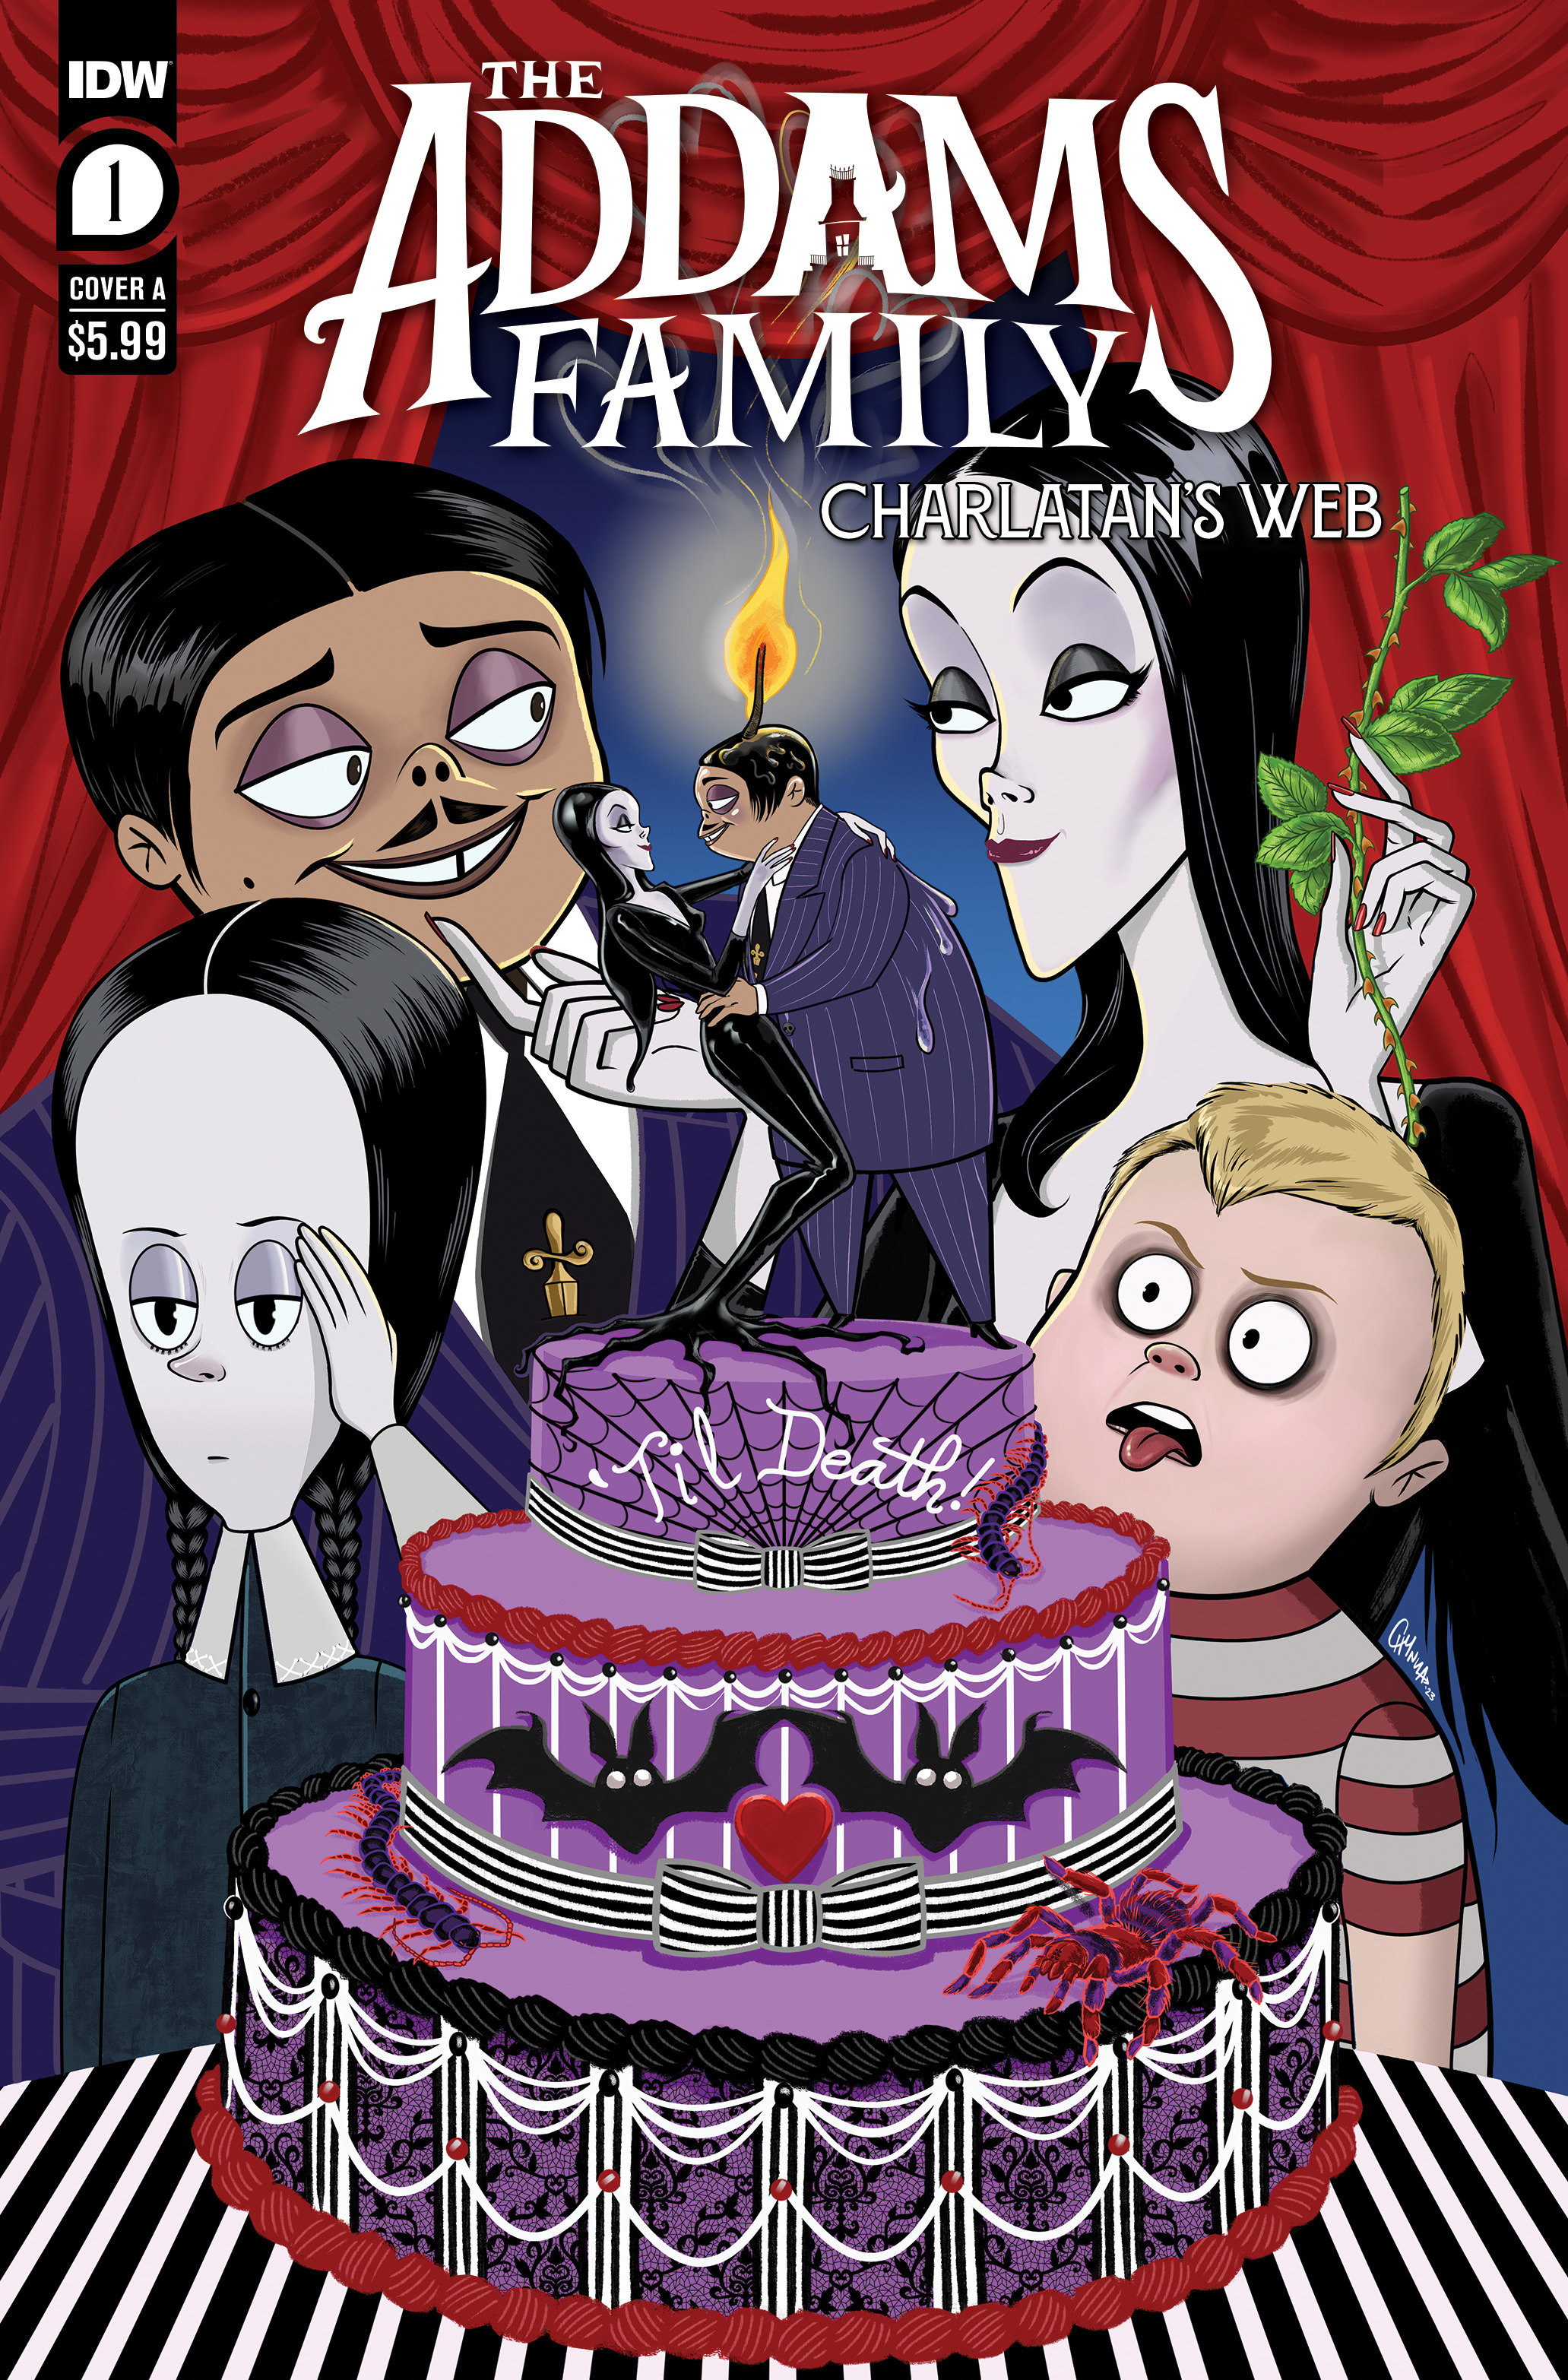 The Addams Family Charlatan's Web #1 Cover A Clugston Flores